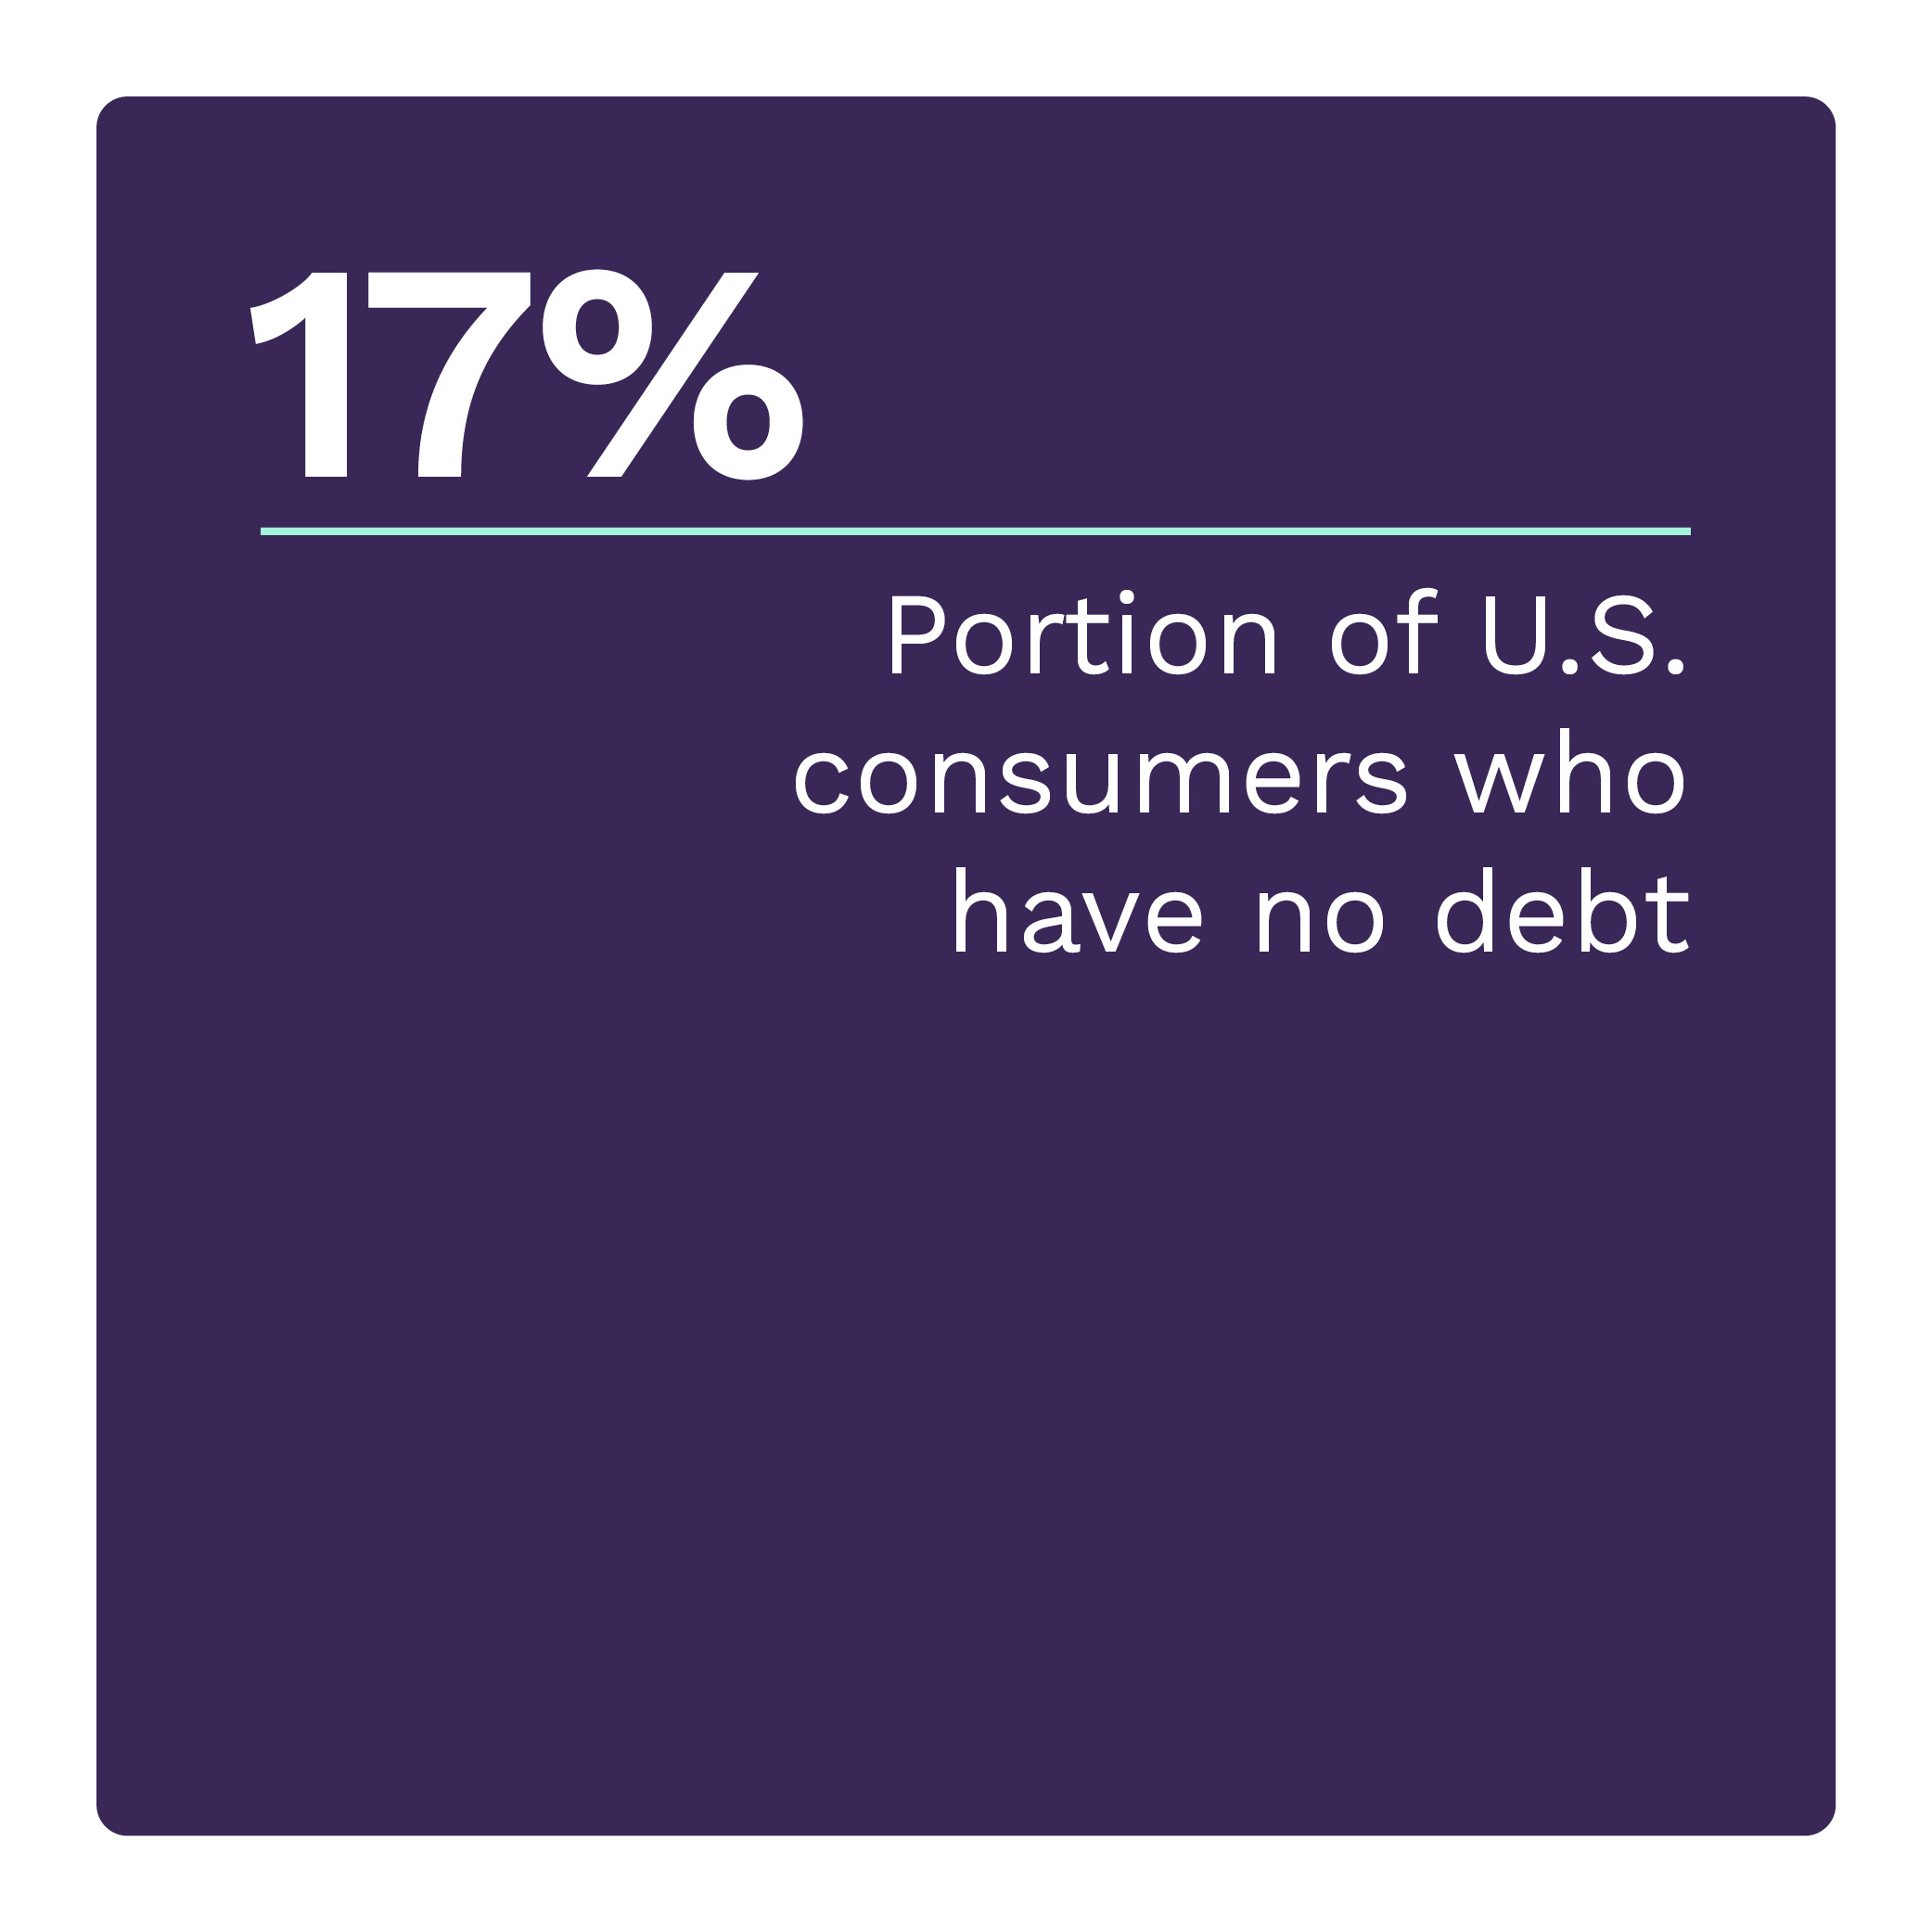 17%: Portion of U.S. consumers who have no debt